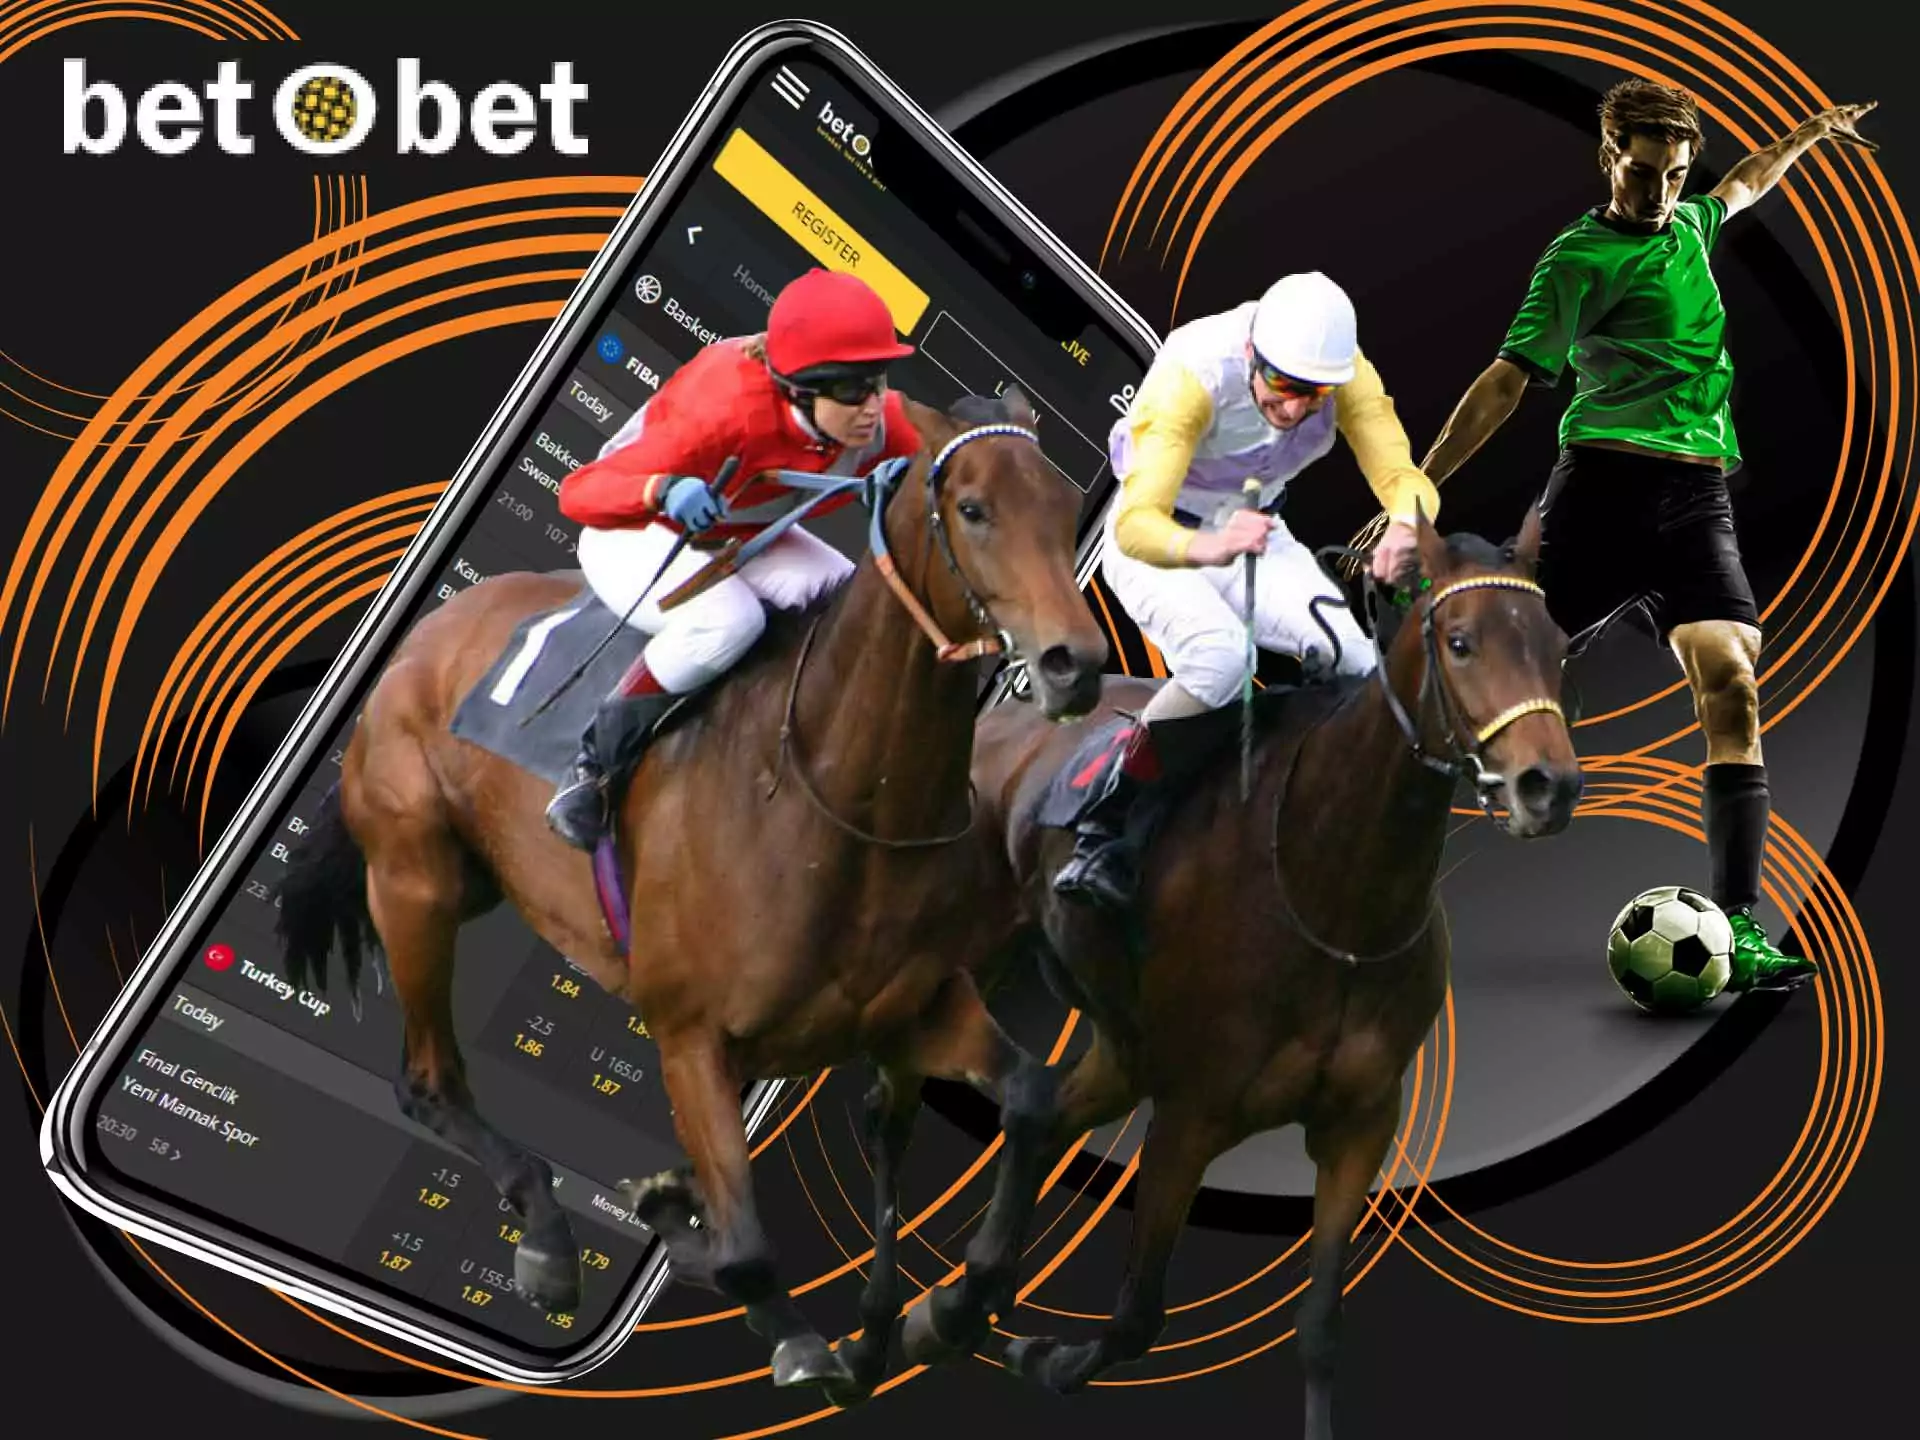 Handicap bets are the most valuable and popular at BetOBet.